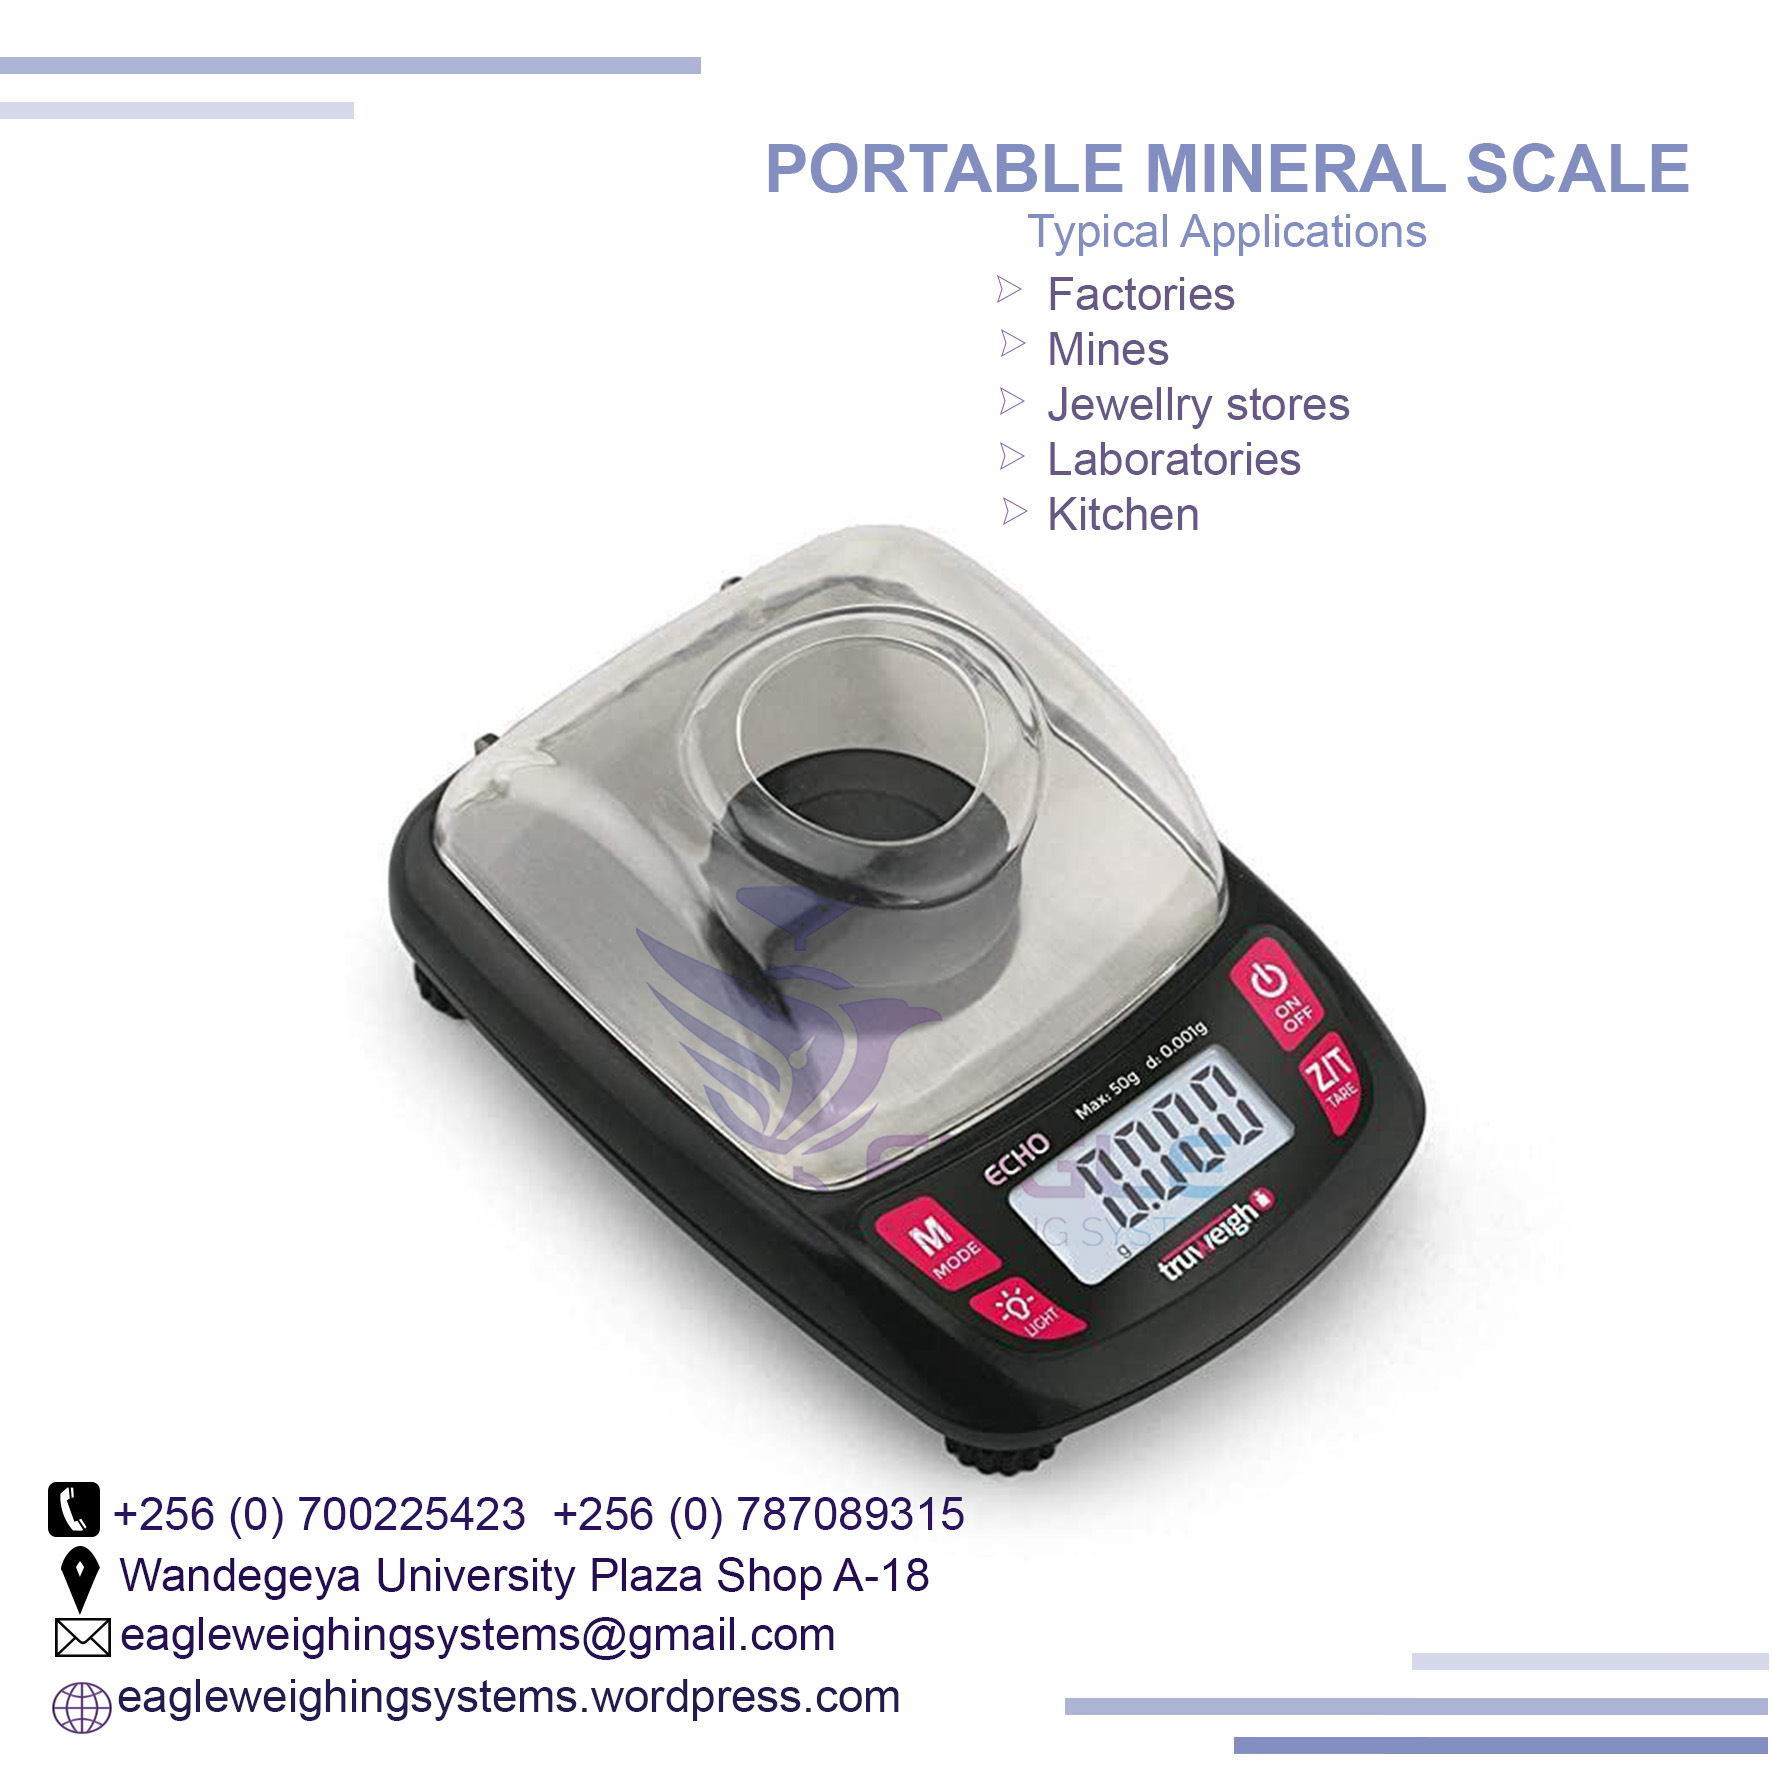 Commercial Portable mineral, jewelry Weighing Scales in Kampala Uganda, Kampala Central Division, Central, Uganda